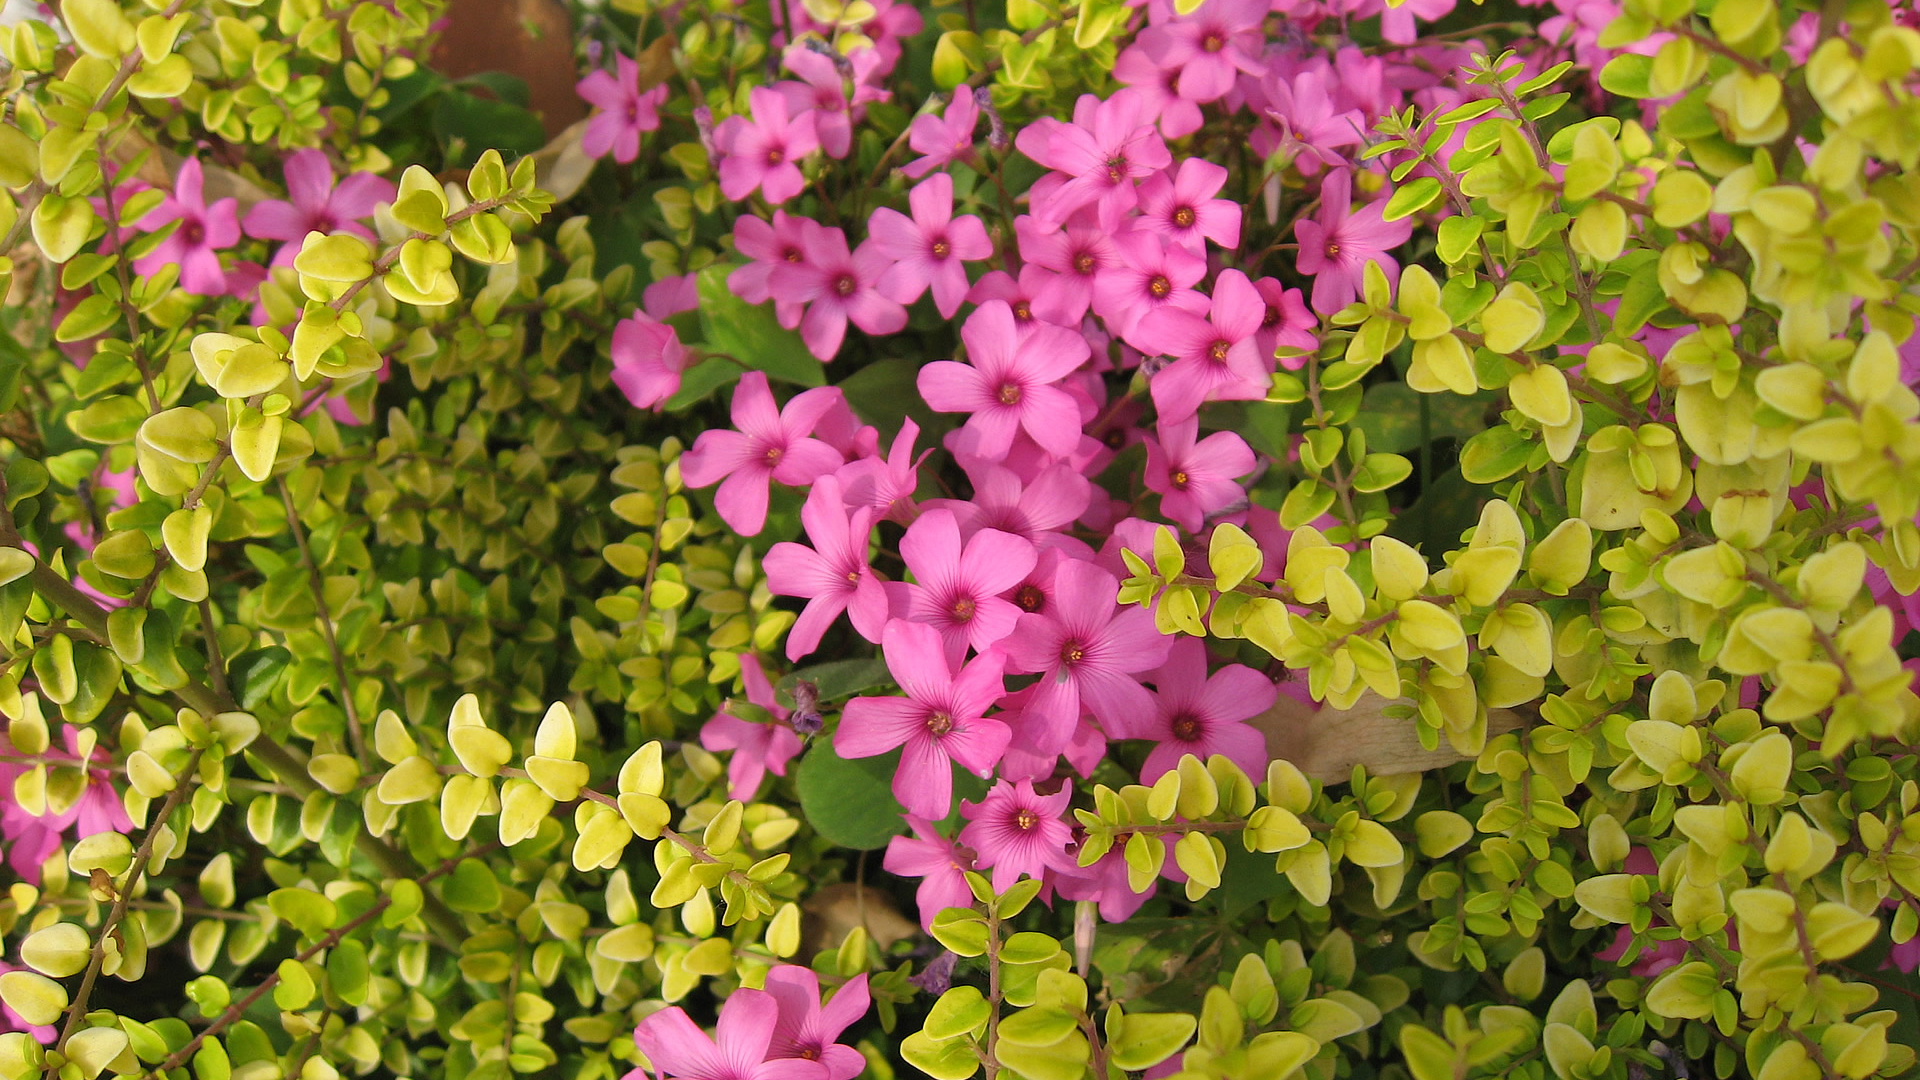 Beautiful Wallpapers Of Pink Flowers With Green Leaves 2K Nature